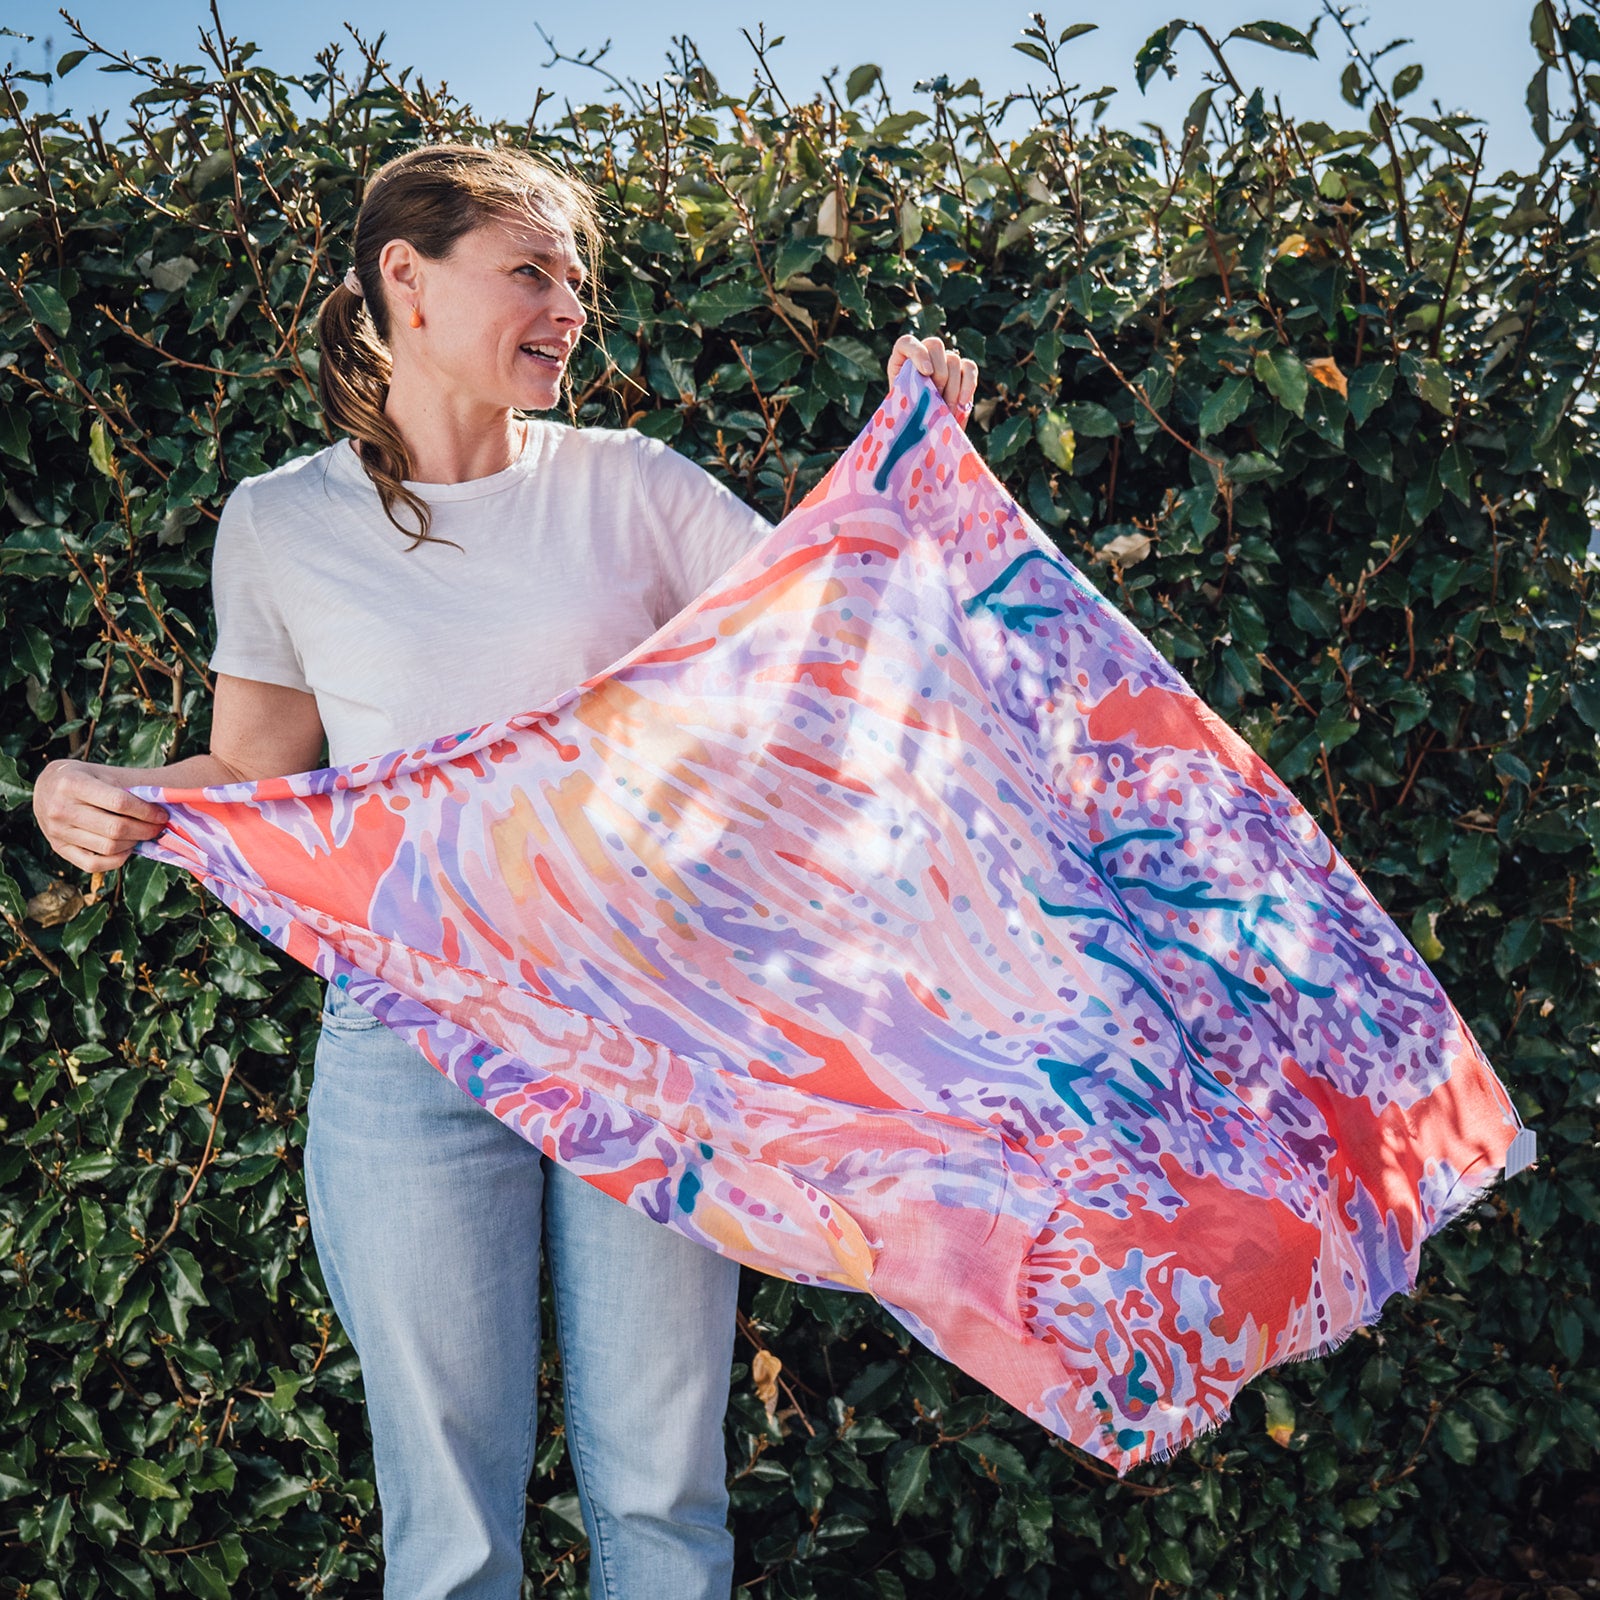 Elevate your style this season with our coral inspired abstract lightweight scarf. Perfect to wear all year round and with a white tee or shirt! It boasts stunning orange, blues and lilac hues. Don't miss this season's must-have accessory!